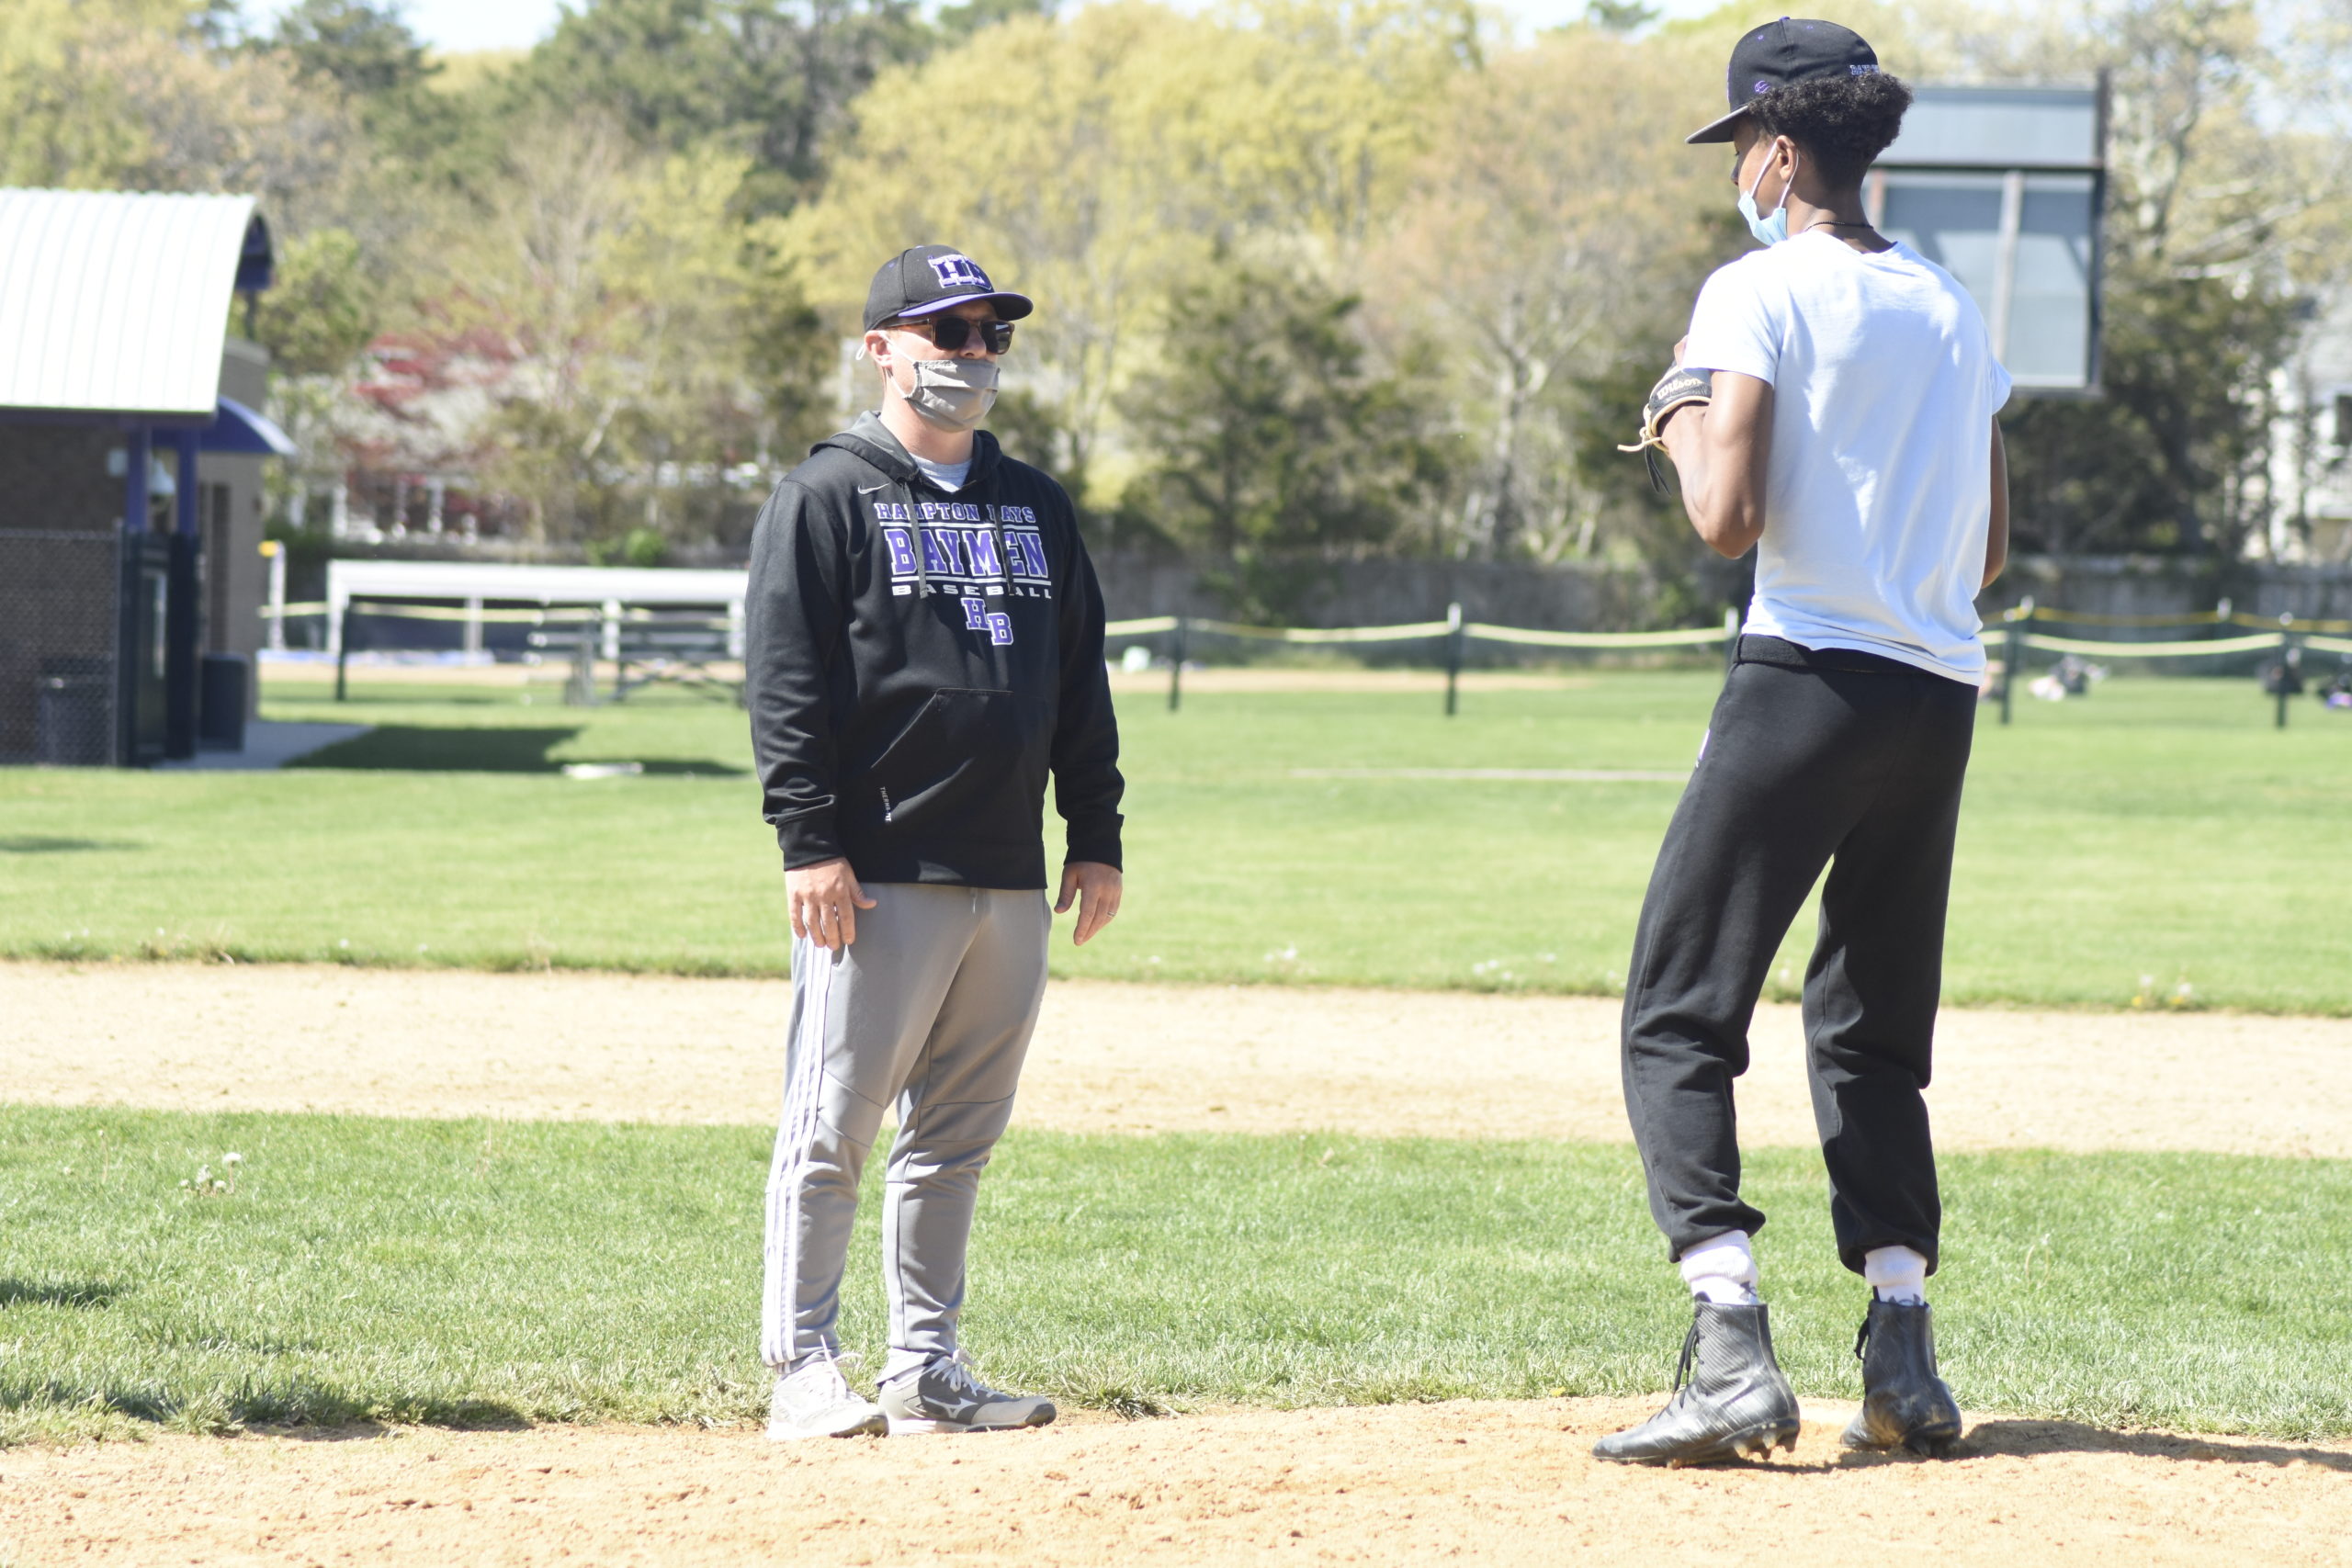 Hampton Bays head coach John Foster going over pick-off moves with his pitcher in practice on Thursday, May 6.